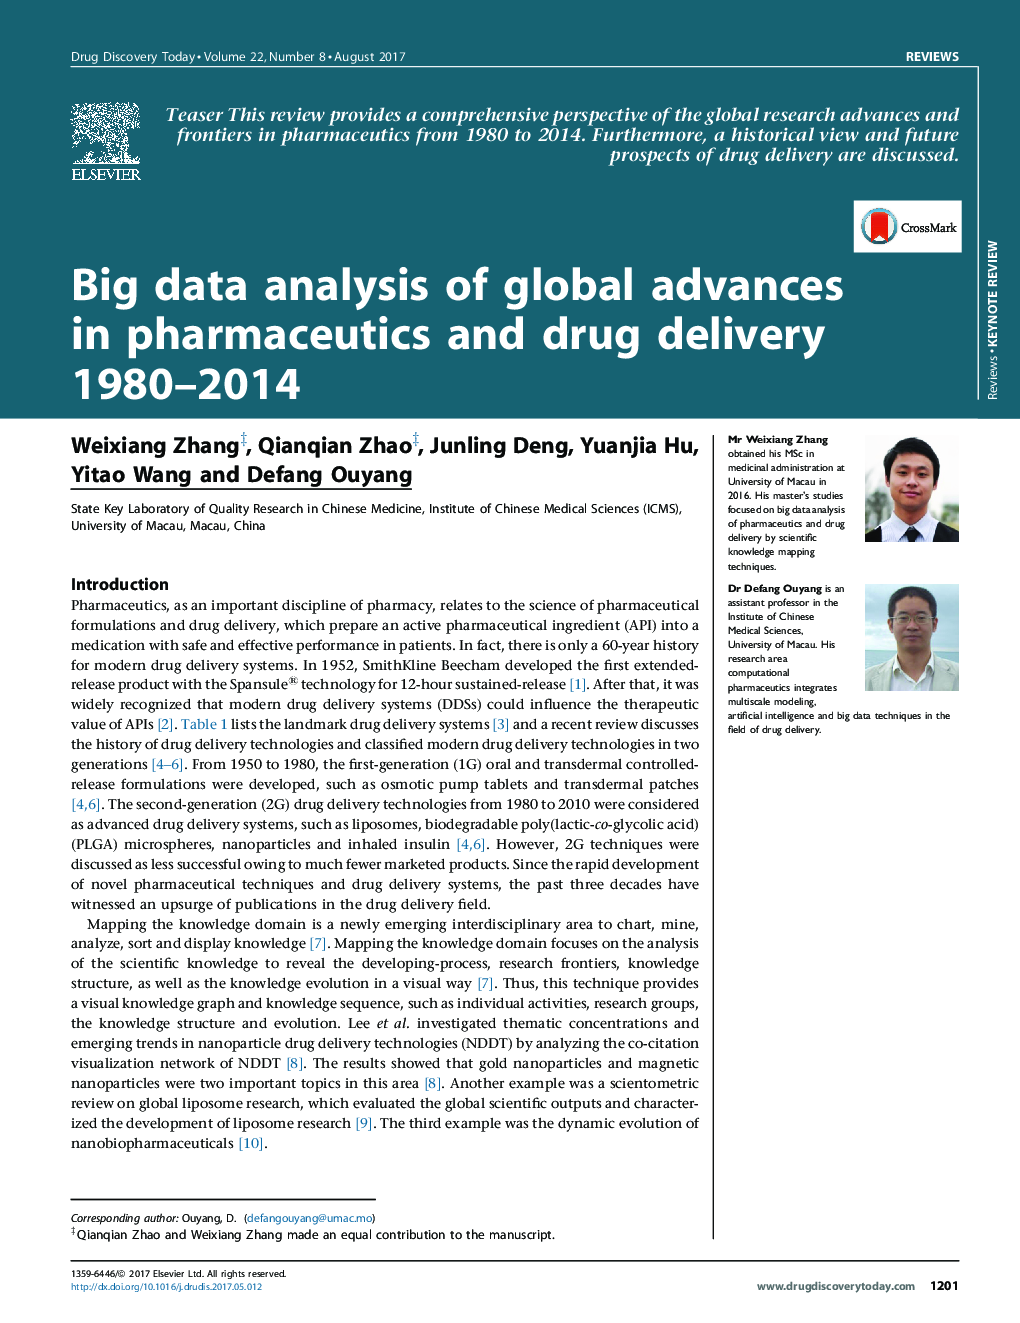 ReviewKeynoteBig data analysis of global advances in pharmaceutics and drug delivery 1980-2014